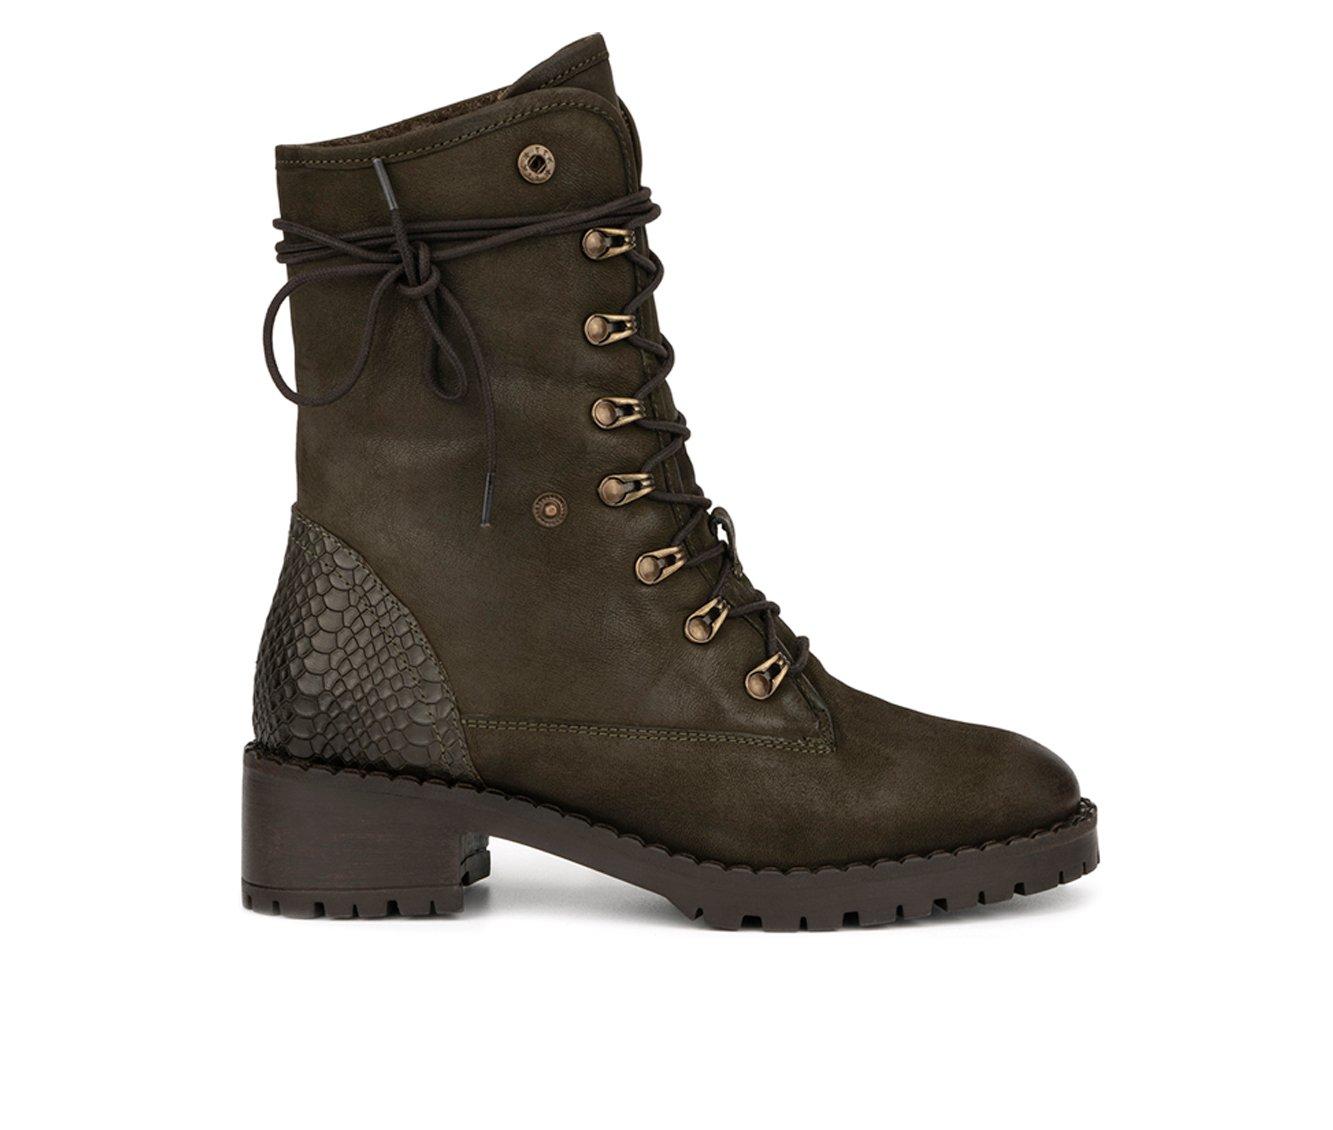 Women's Vintage Foundry Co Milan Winter Lace-Up Booties